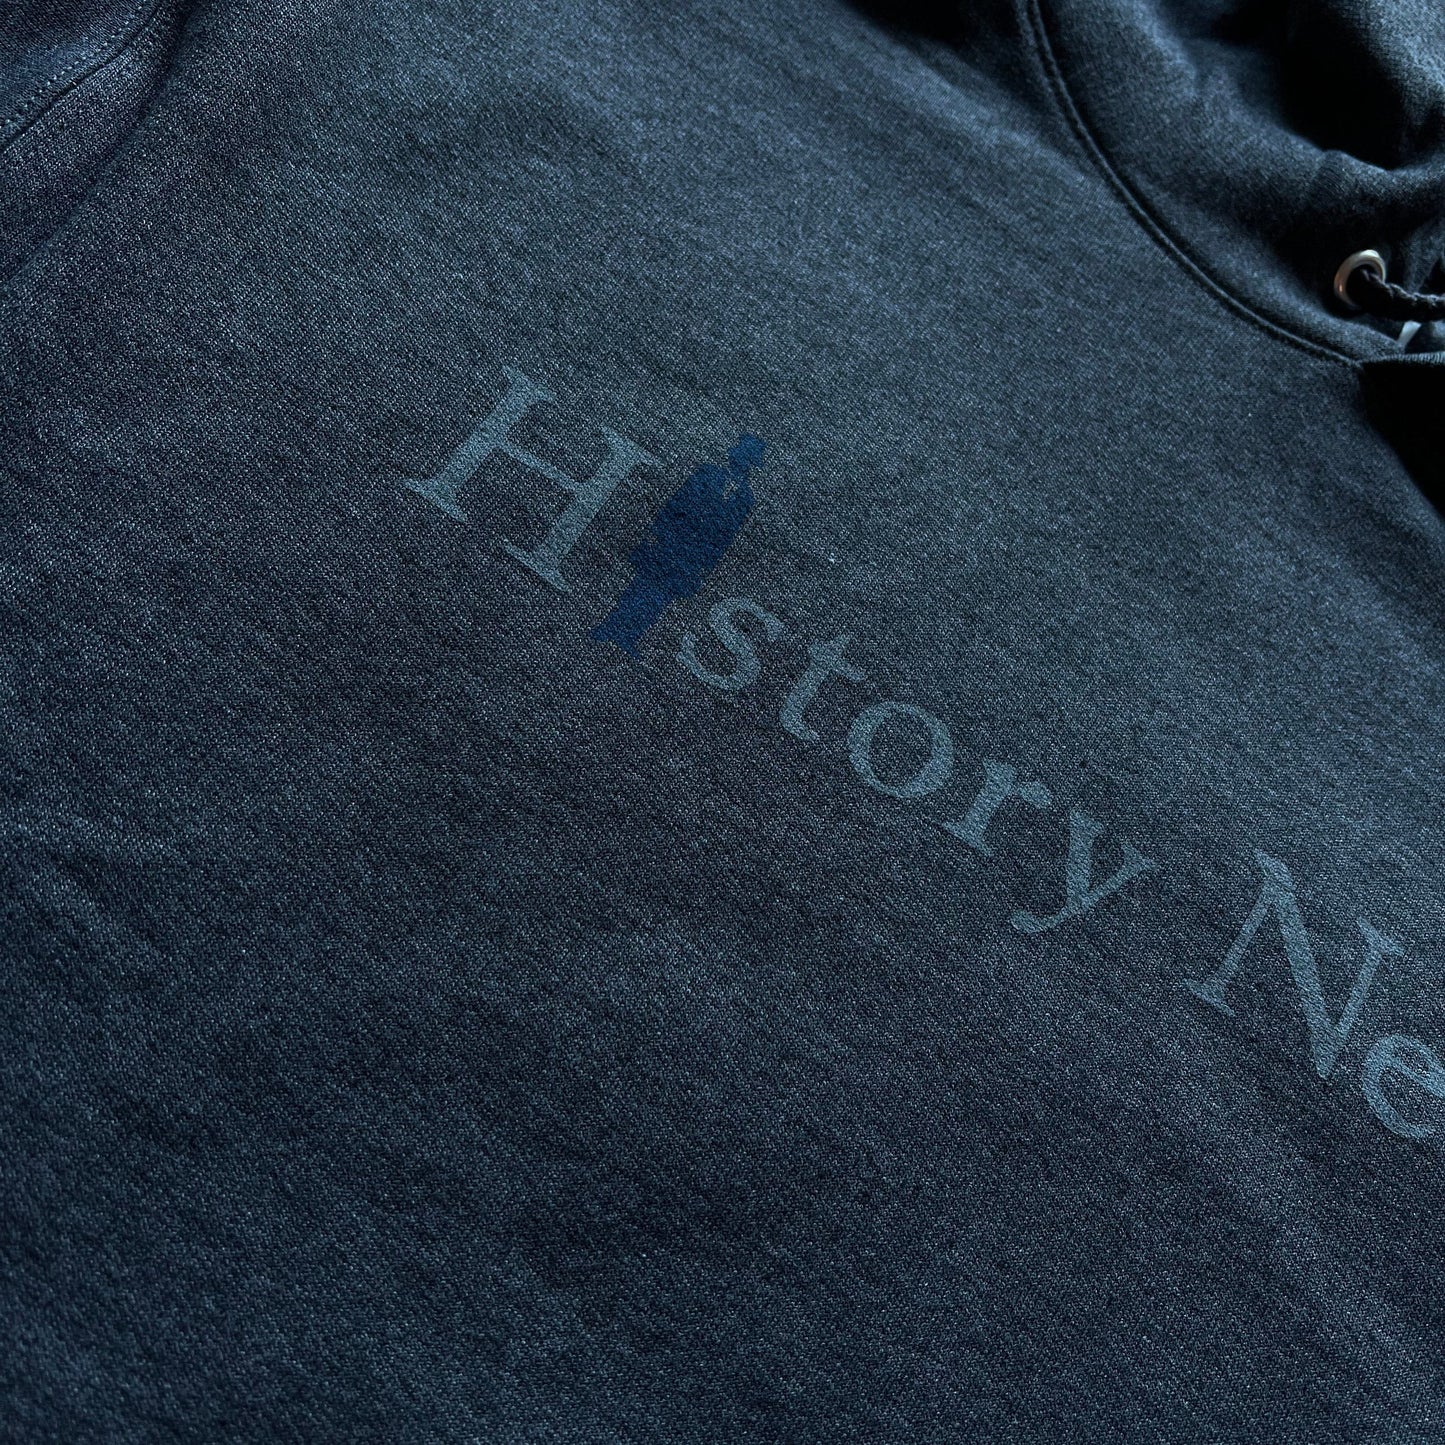 Close-up of "History Nerd" with Abraham Lincoln - Hooded sweatshirt in Charcoal heather from The History List store